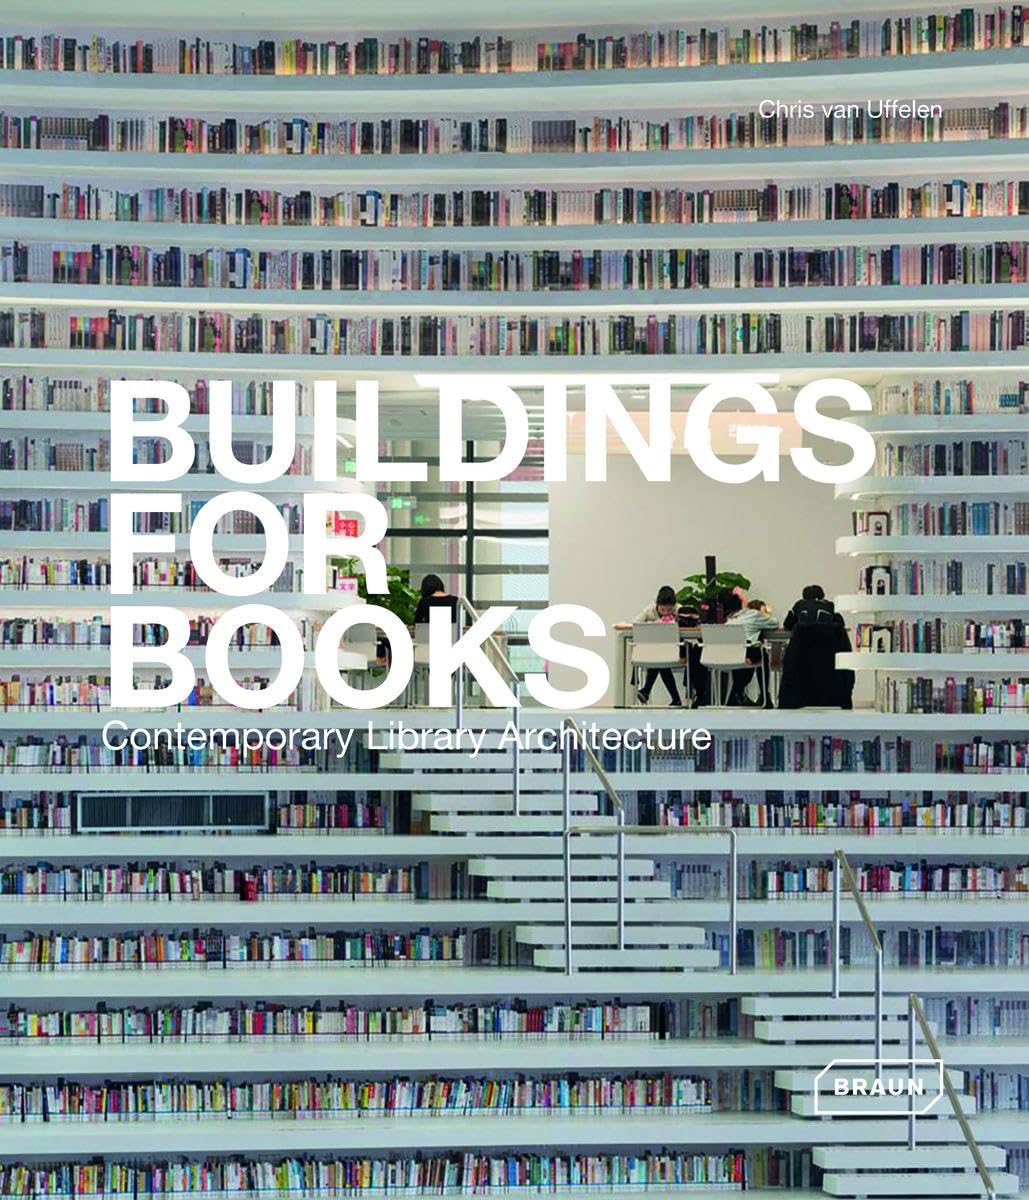 Buildings for Books : Contemporary Library Architecture